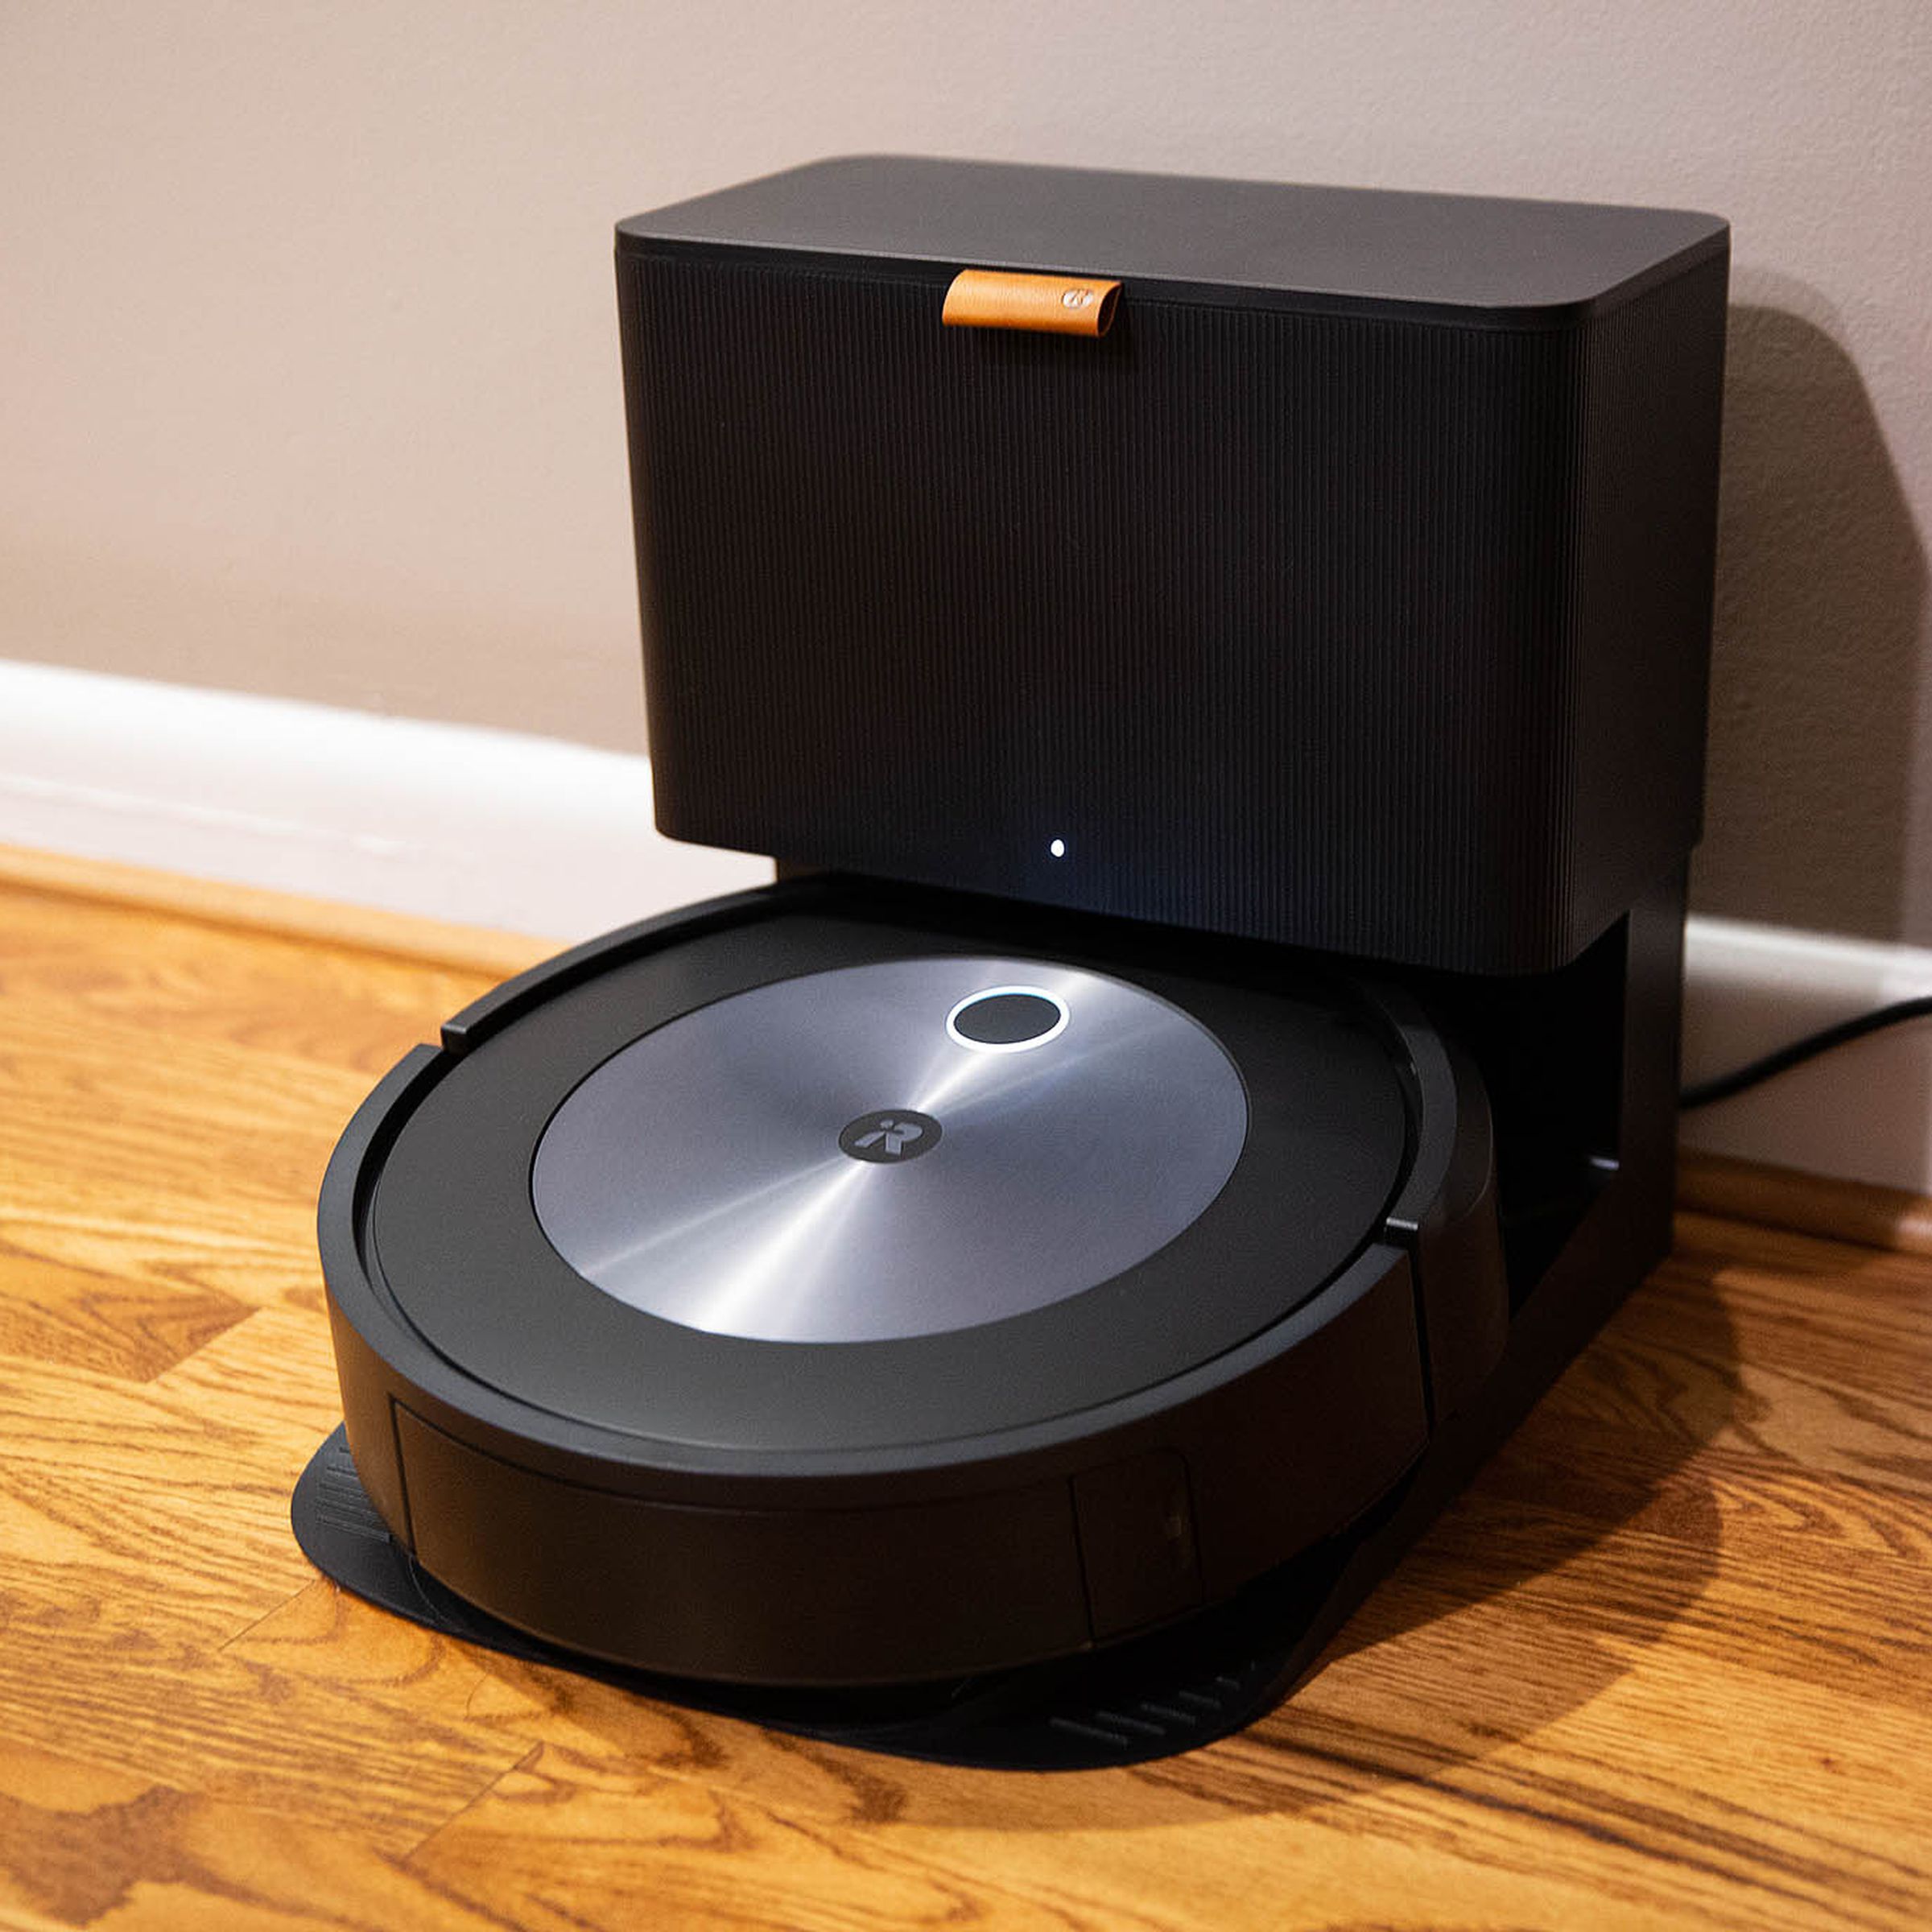 Image of a black-and-silver disc-shaped robot vacuum docked into a black auto-empty dock. The dock has an orange tag on the front and a small white status LED on the lower front face above where the vacuum sits at rest.